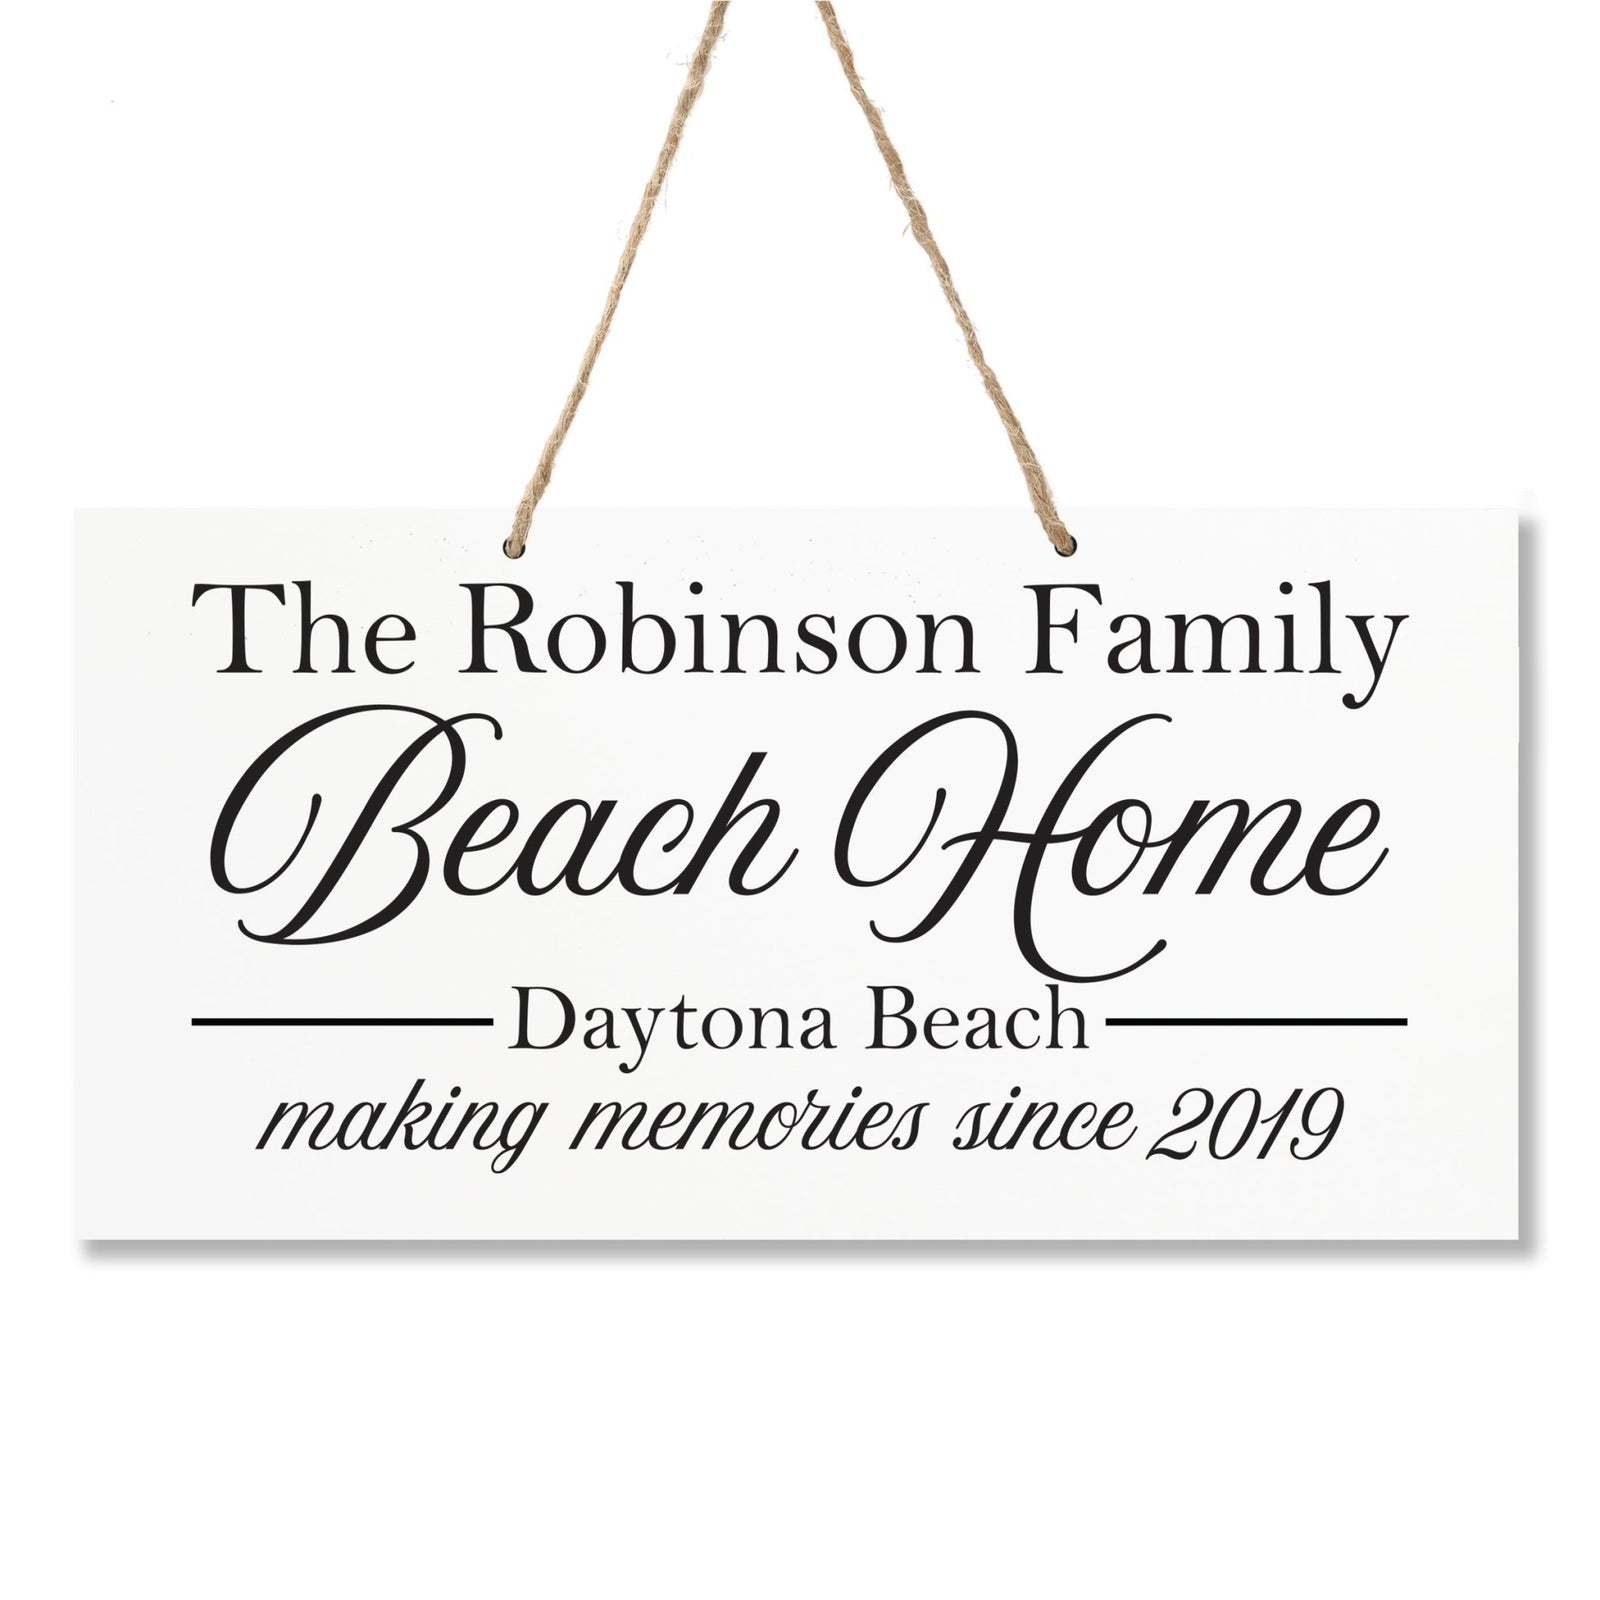 Personalized Family Name Sign For New Home - Beach House - LifeSong Milestones